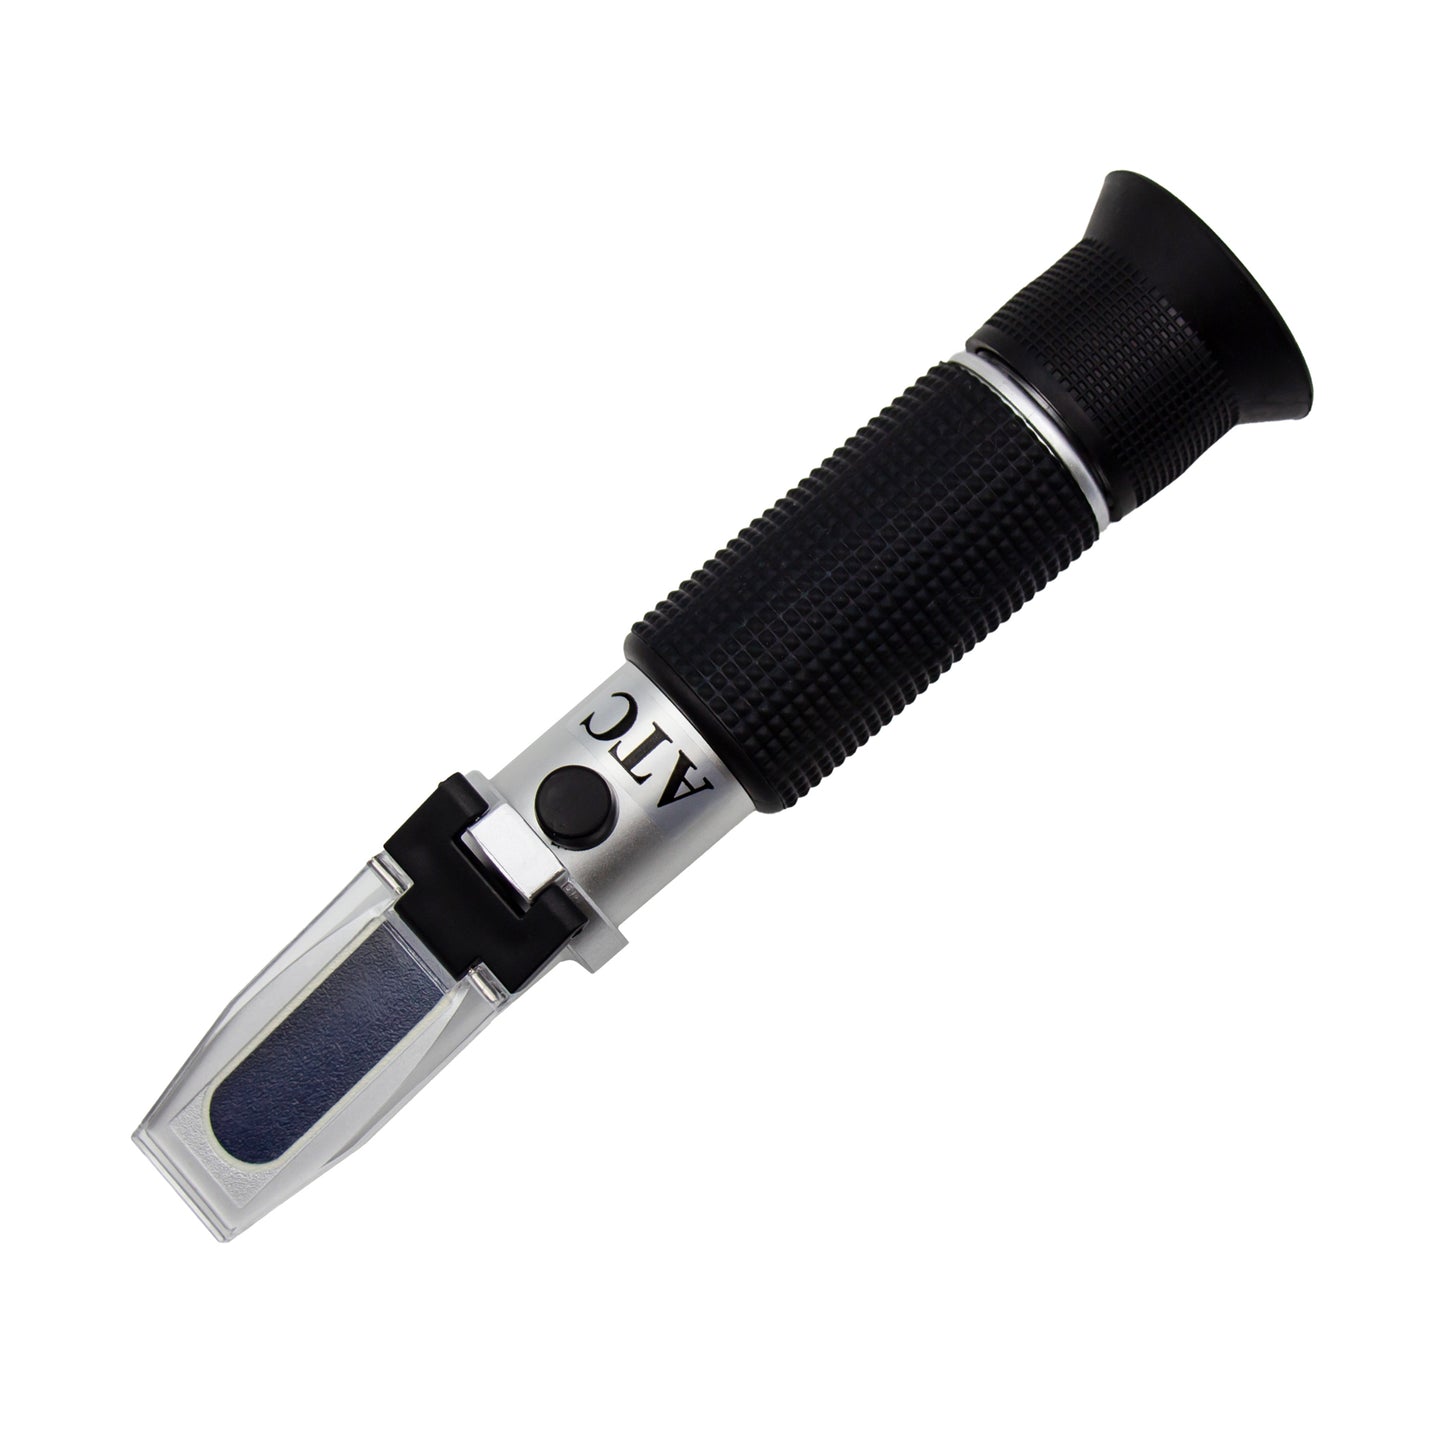 hand held refractometer used in home brewing